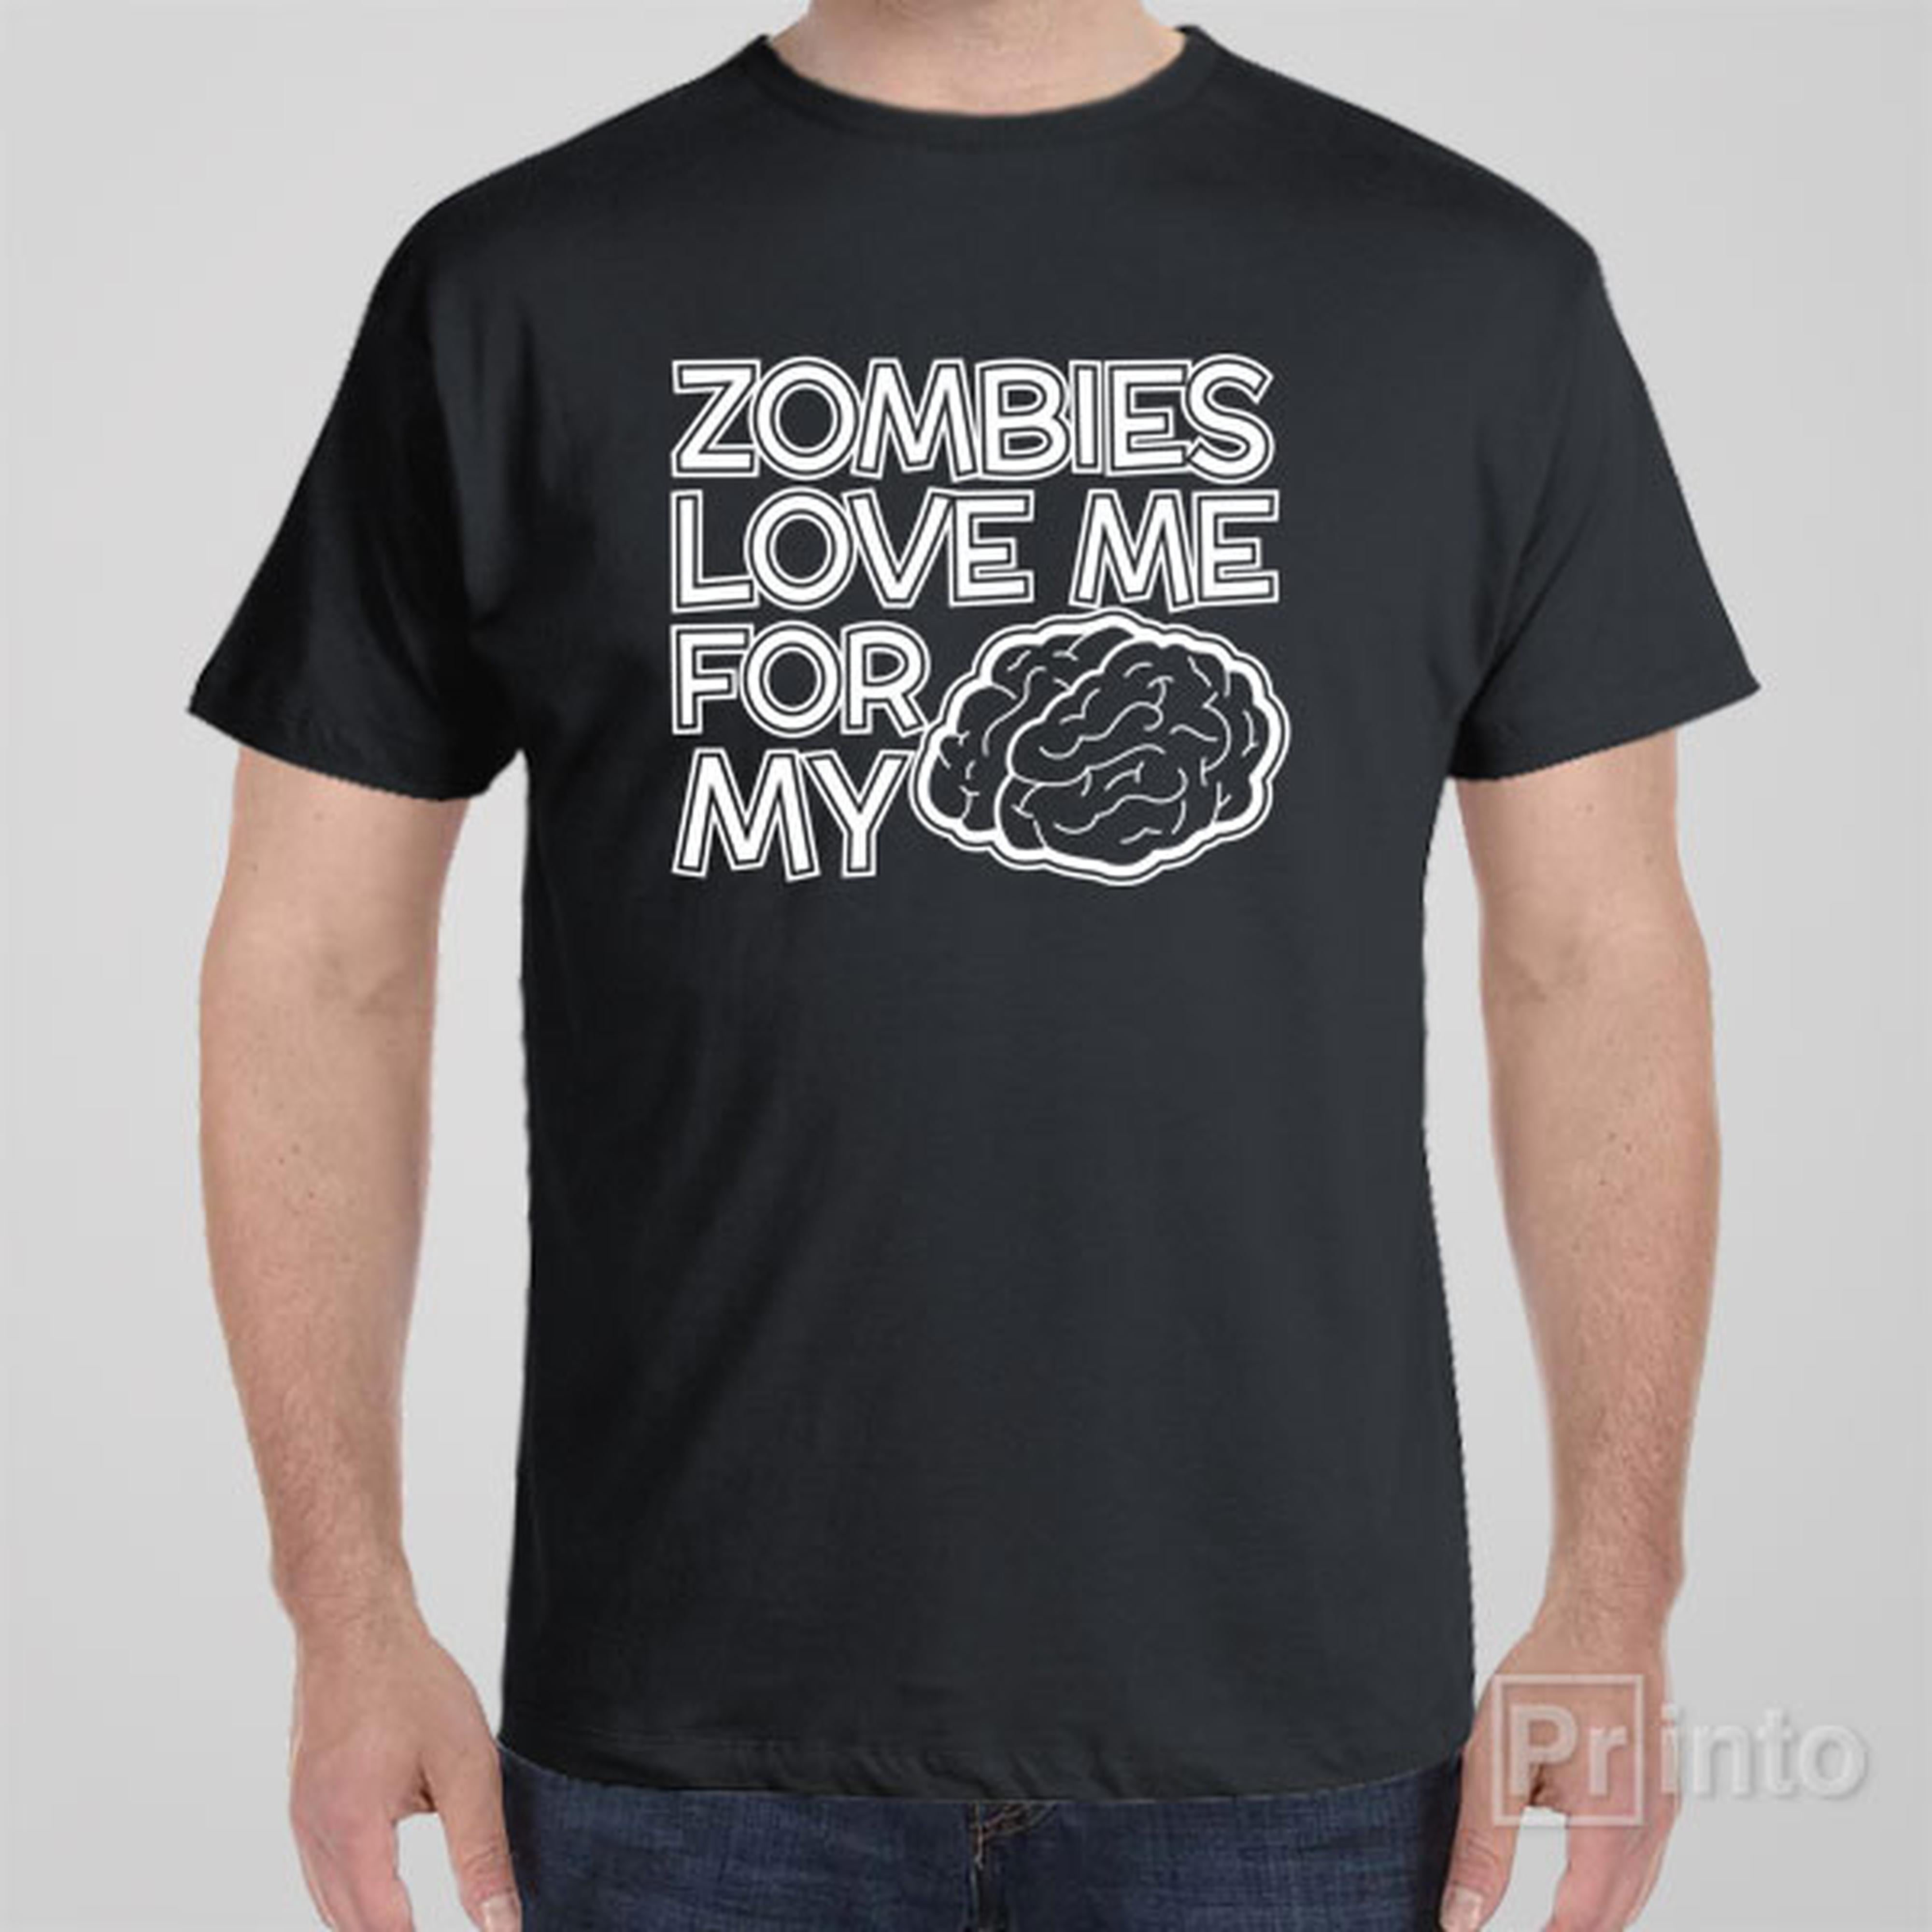 zombies-love-me-for-my-brain-t-shirt